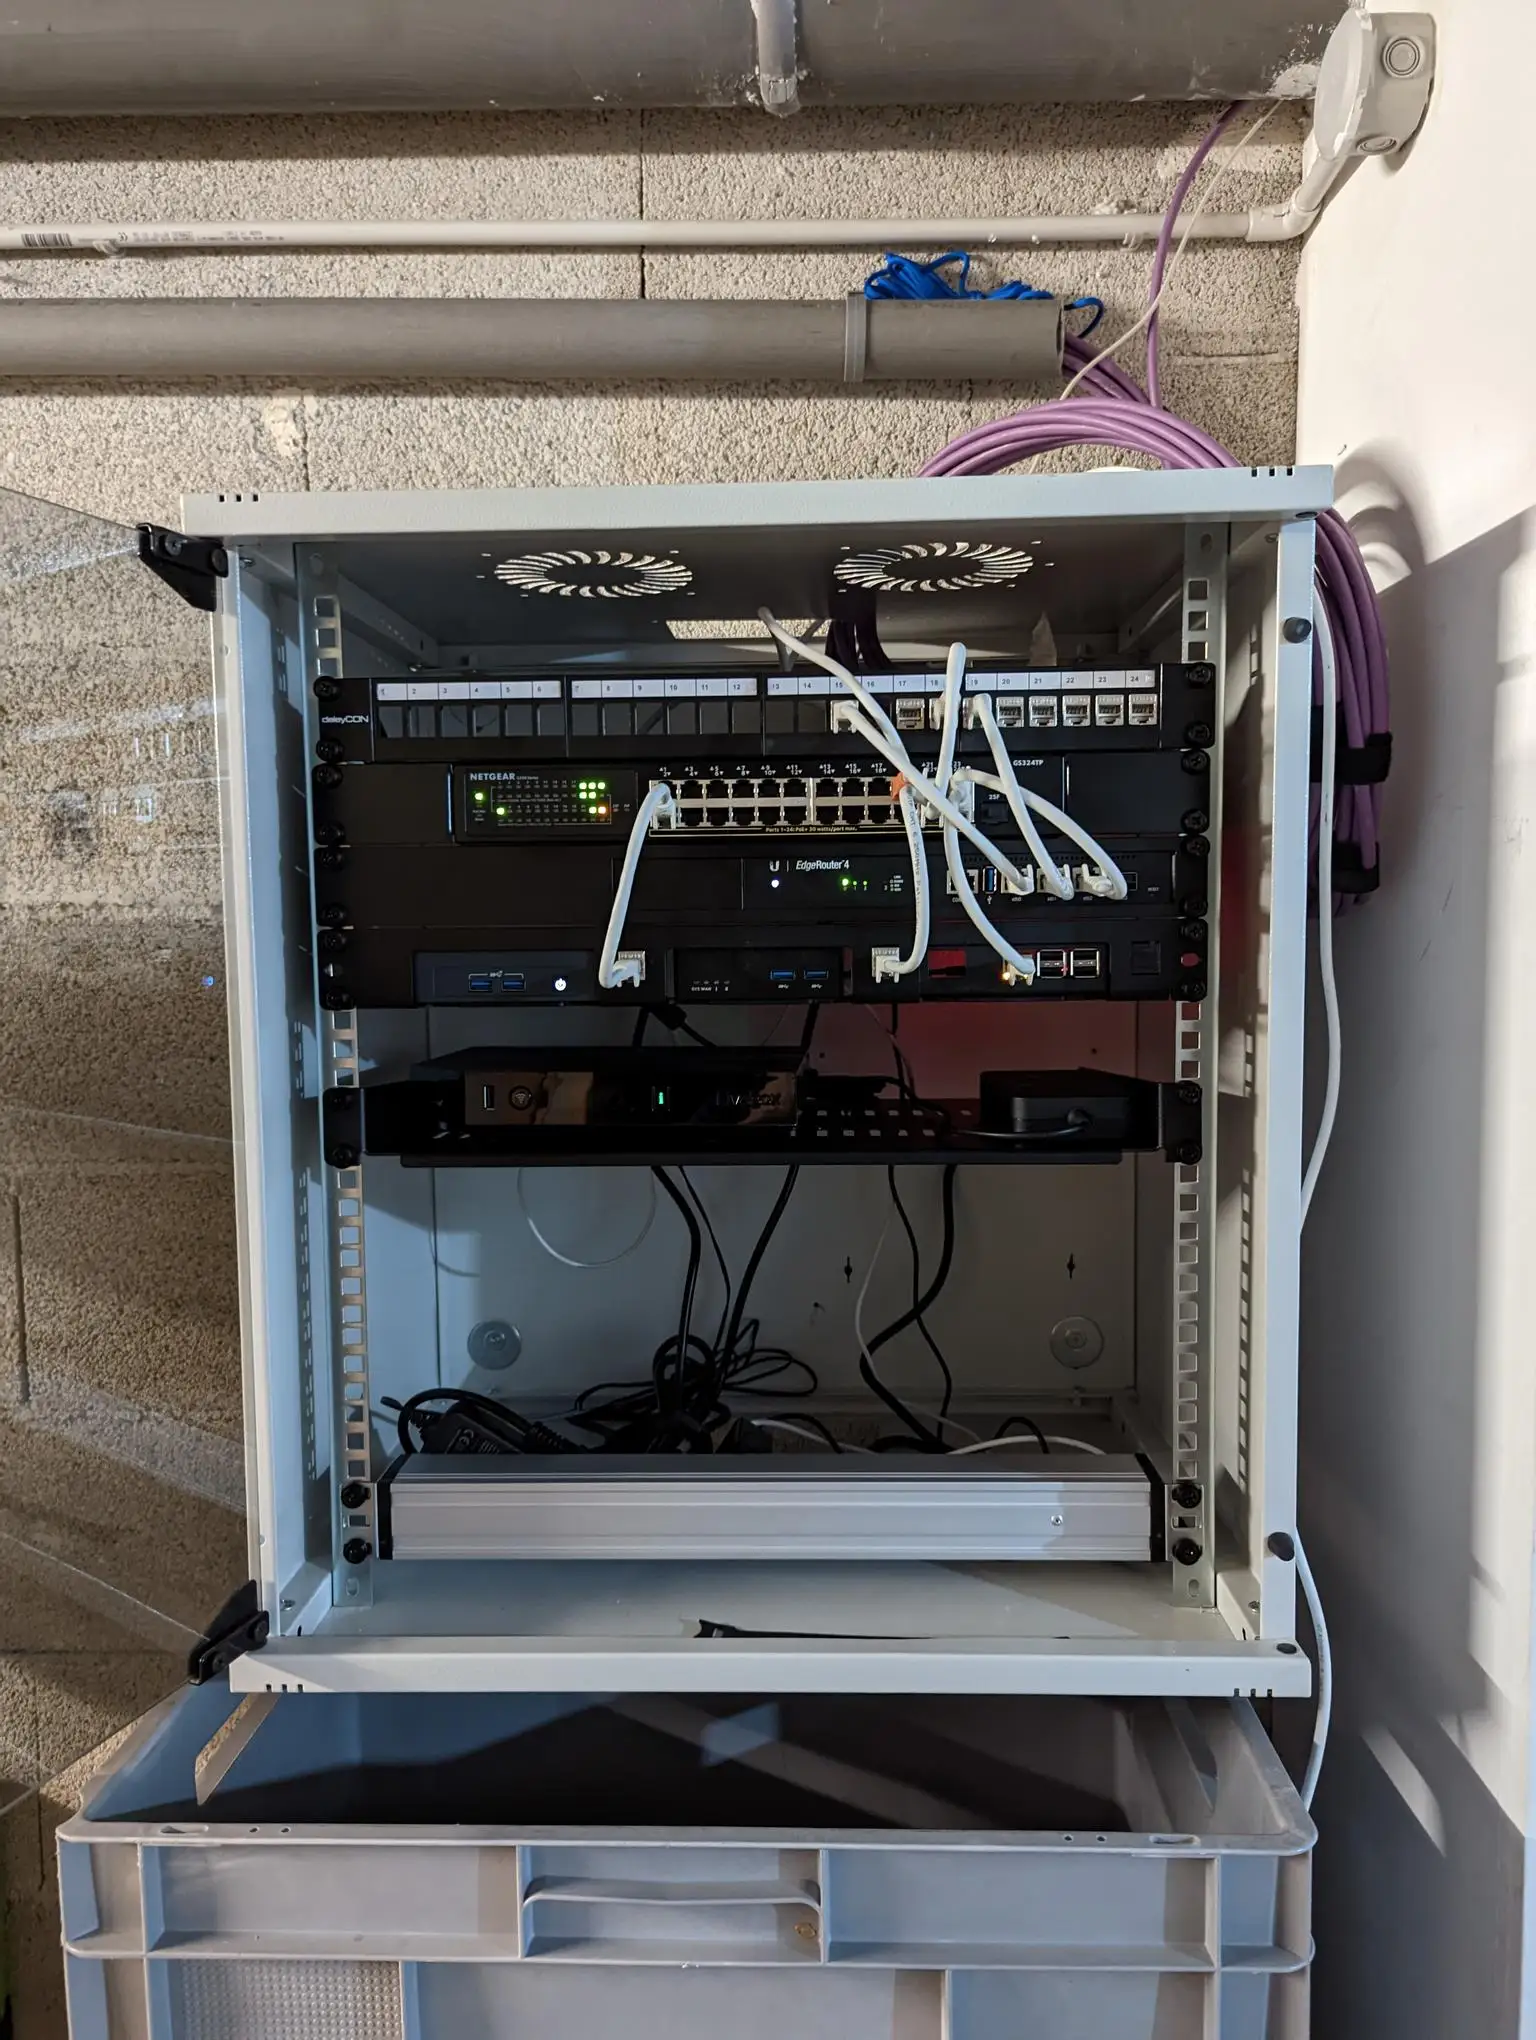 Network rack connected